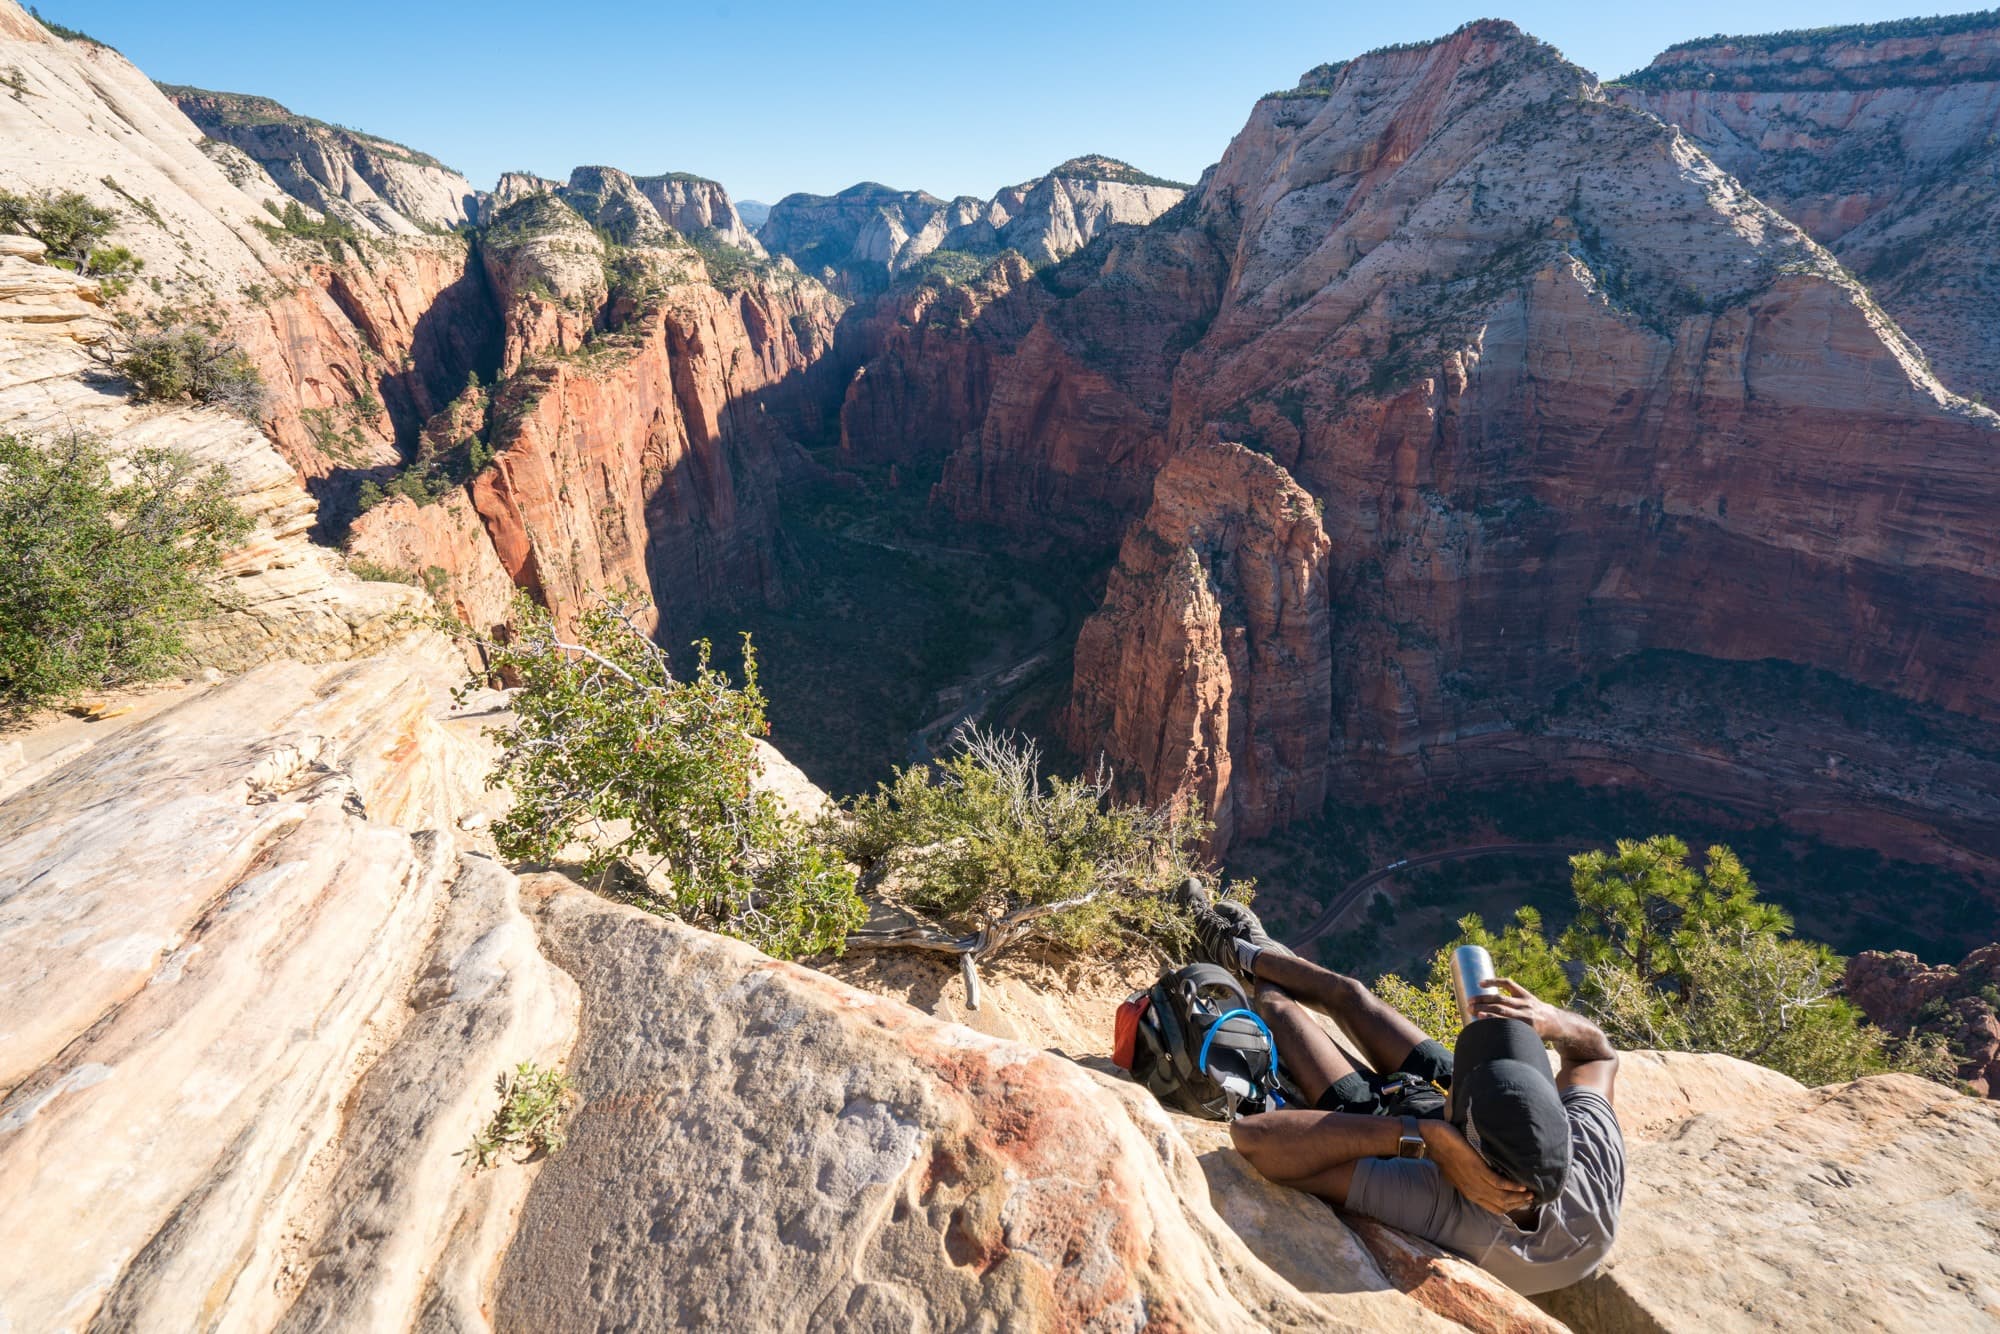 Angel's Landing // Explore Utah National Parks in this 9-day road trip itinerary with the best hikes, activities & camping in Zion, Bryce, Capitol Reef, Arches & Canyonlands.